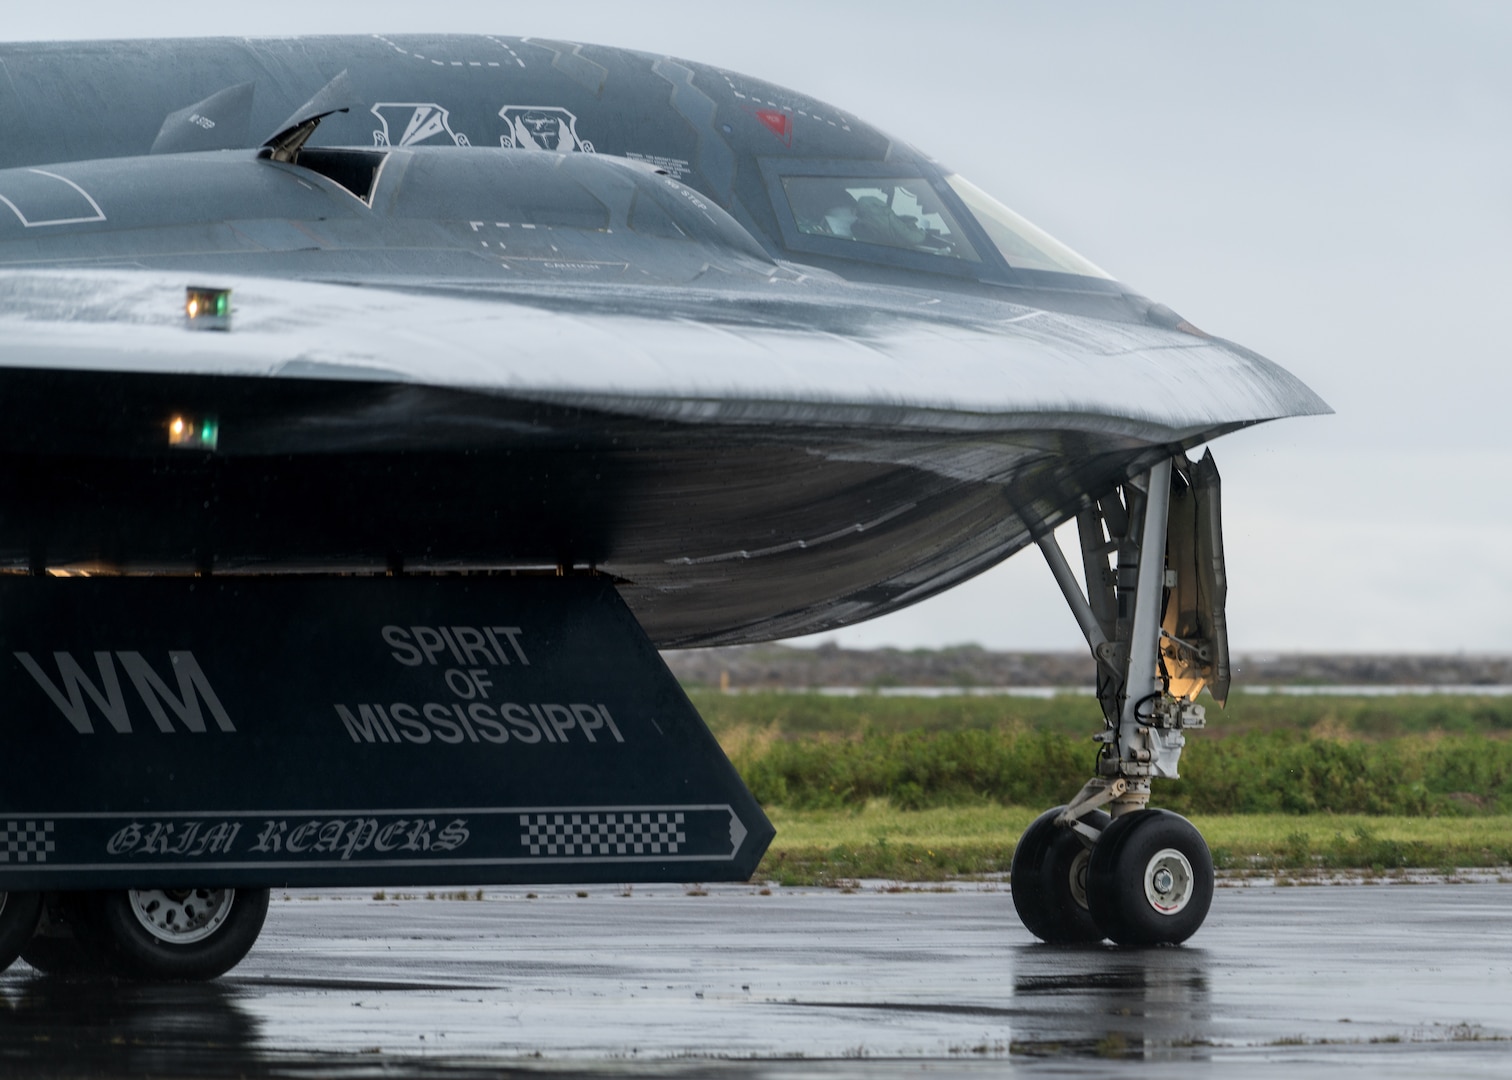 A B-2 Spirit Stealth Bomber from Whiteman Air Force Base, Missouri taxis down a runway at Naval Air Station Keflavik, Iceland, August 28, 2019. This is the B-2s first time landing in Iceland. While in Iceland Airmen from Whiteman conducted hot-pit refueling, which is a method of refueling an aircraft without shutting down the engines. Forward locations like Iceland enhance the collective defense capabilities of both the U.S. it’s NATO allies.